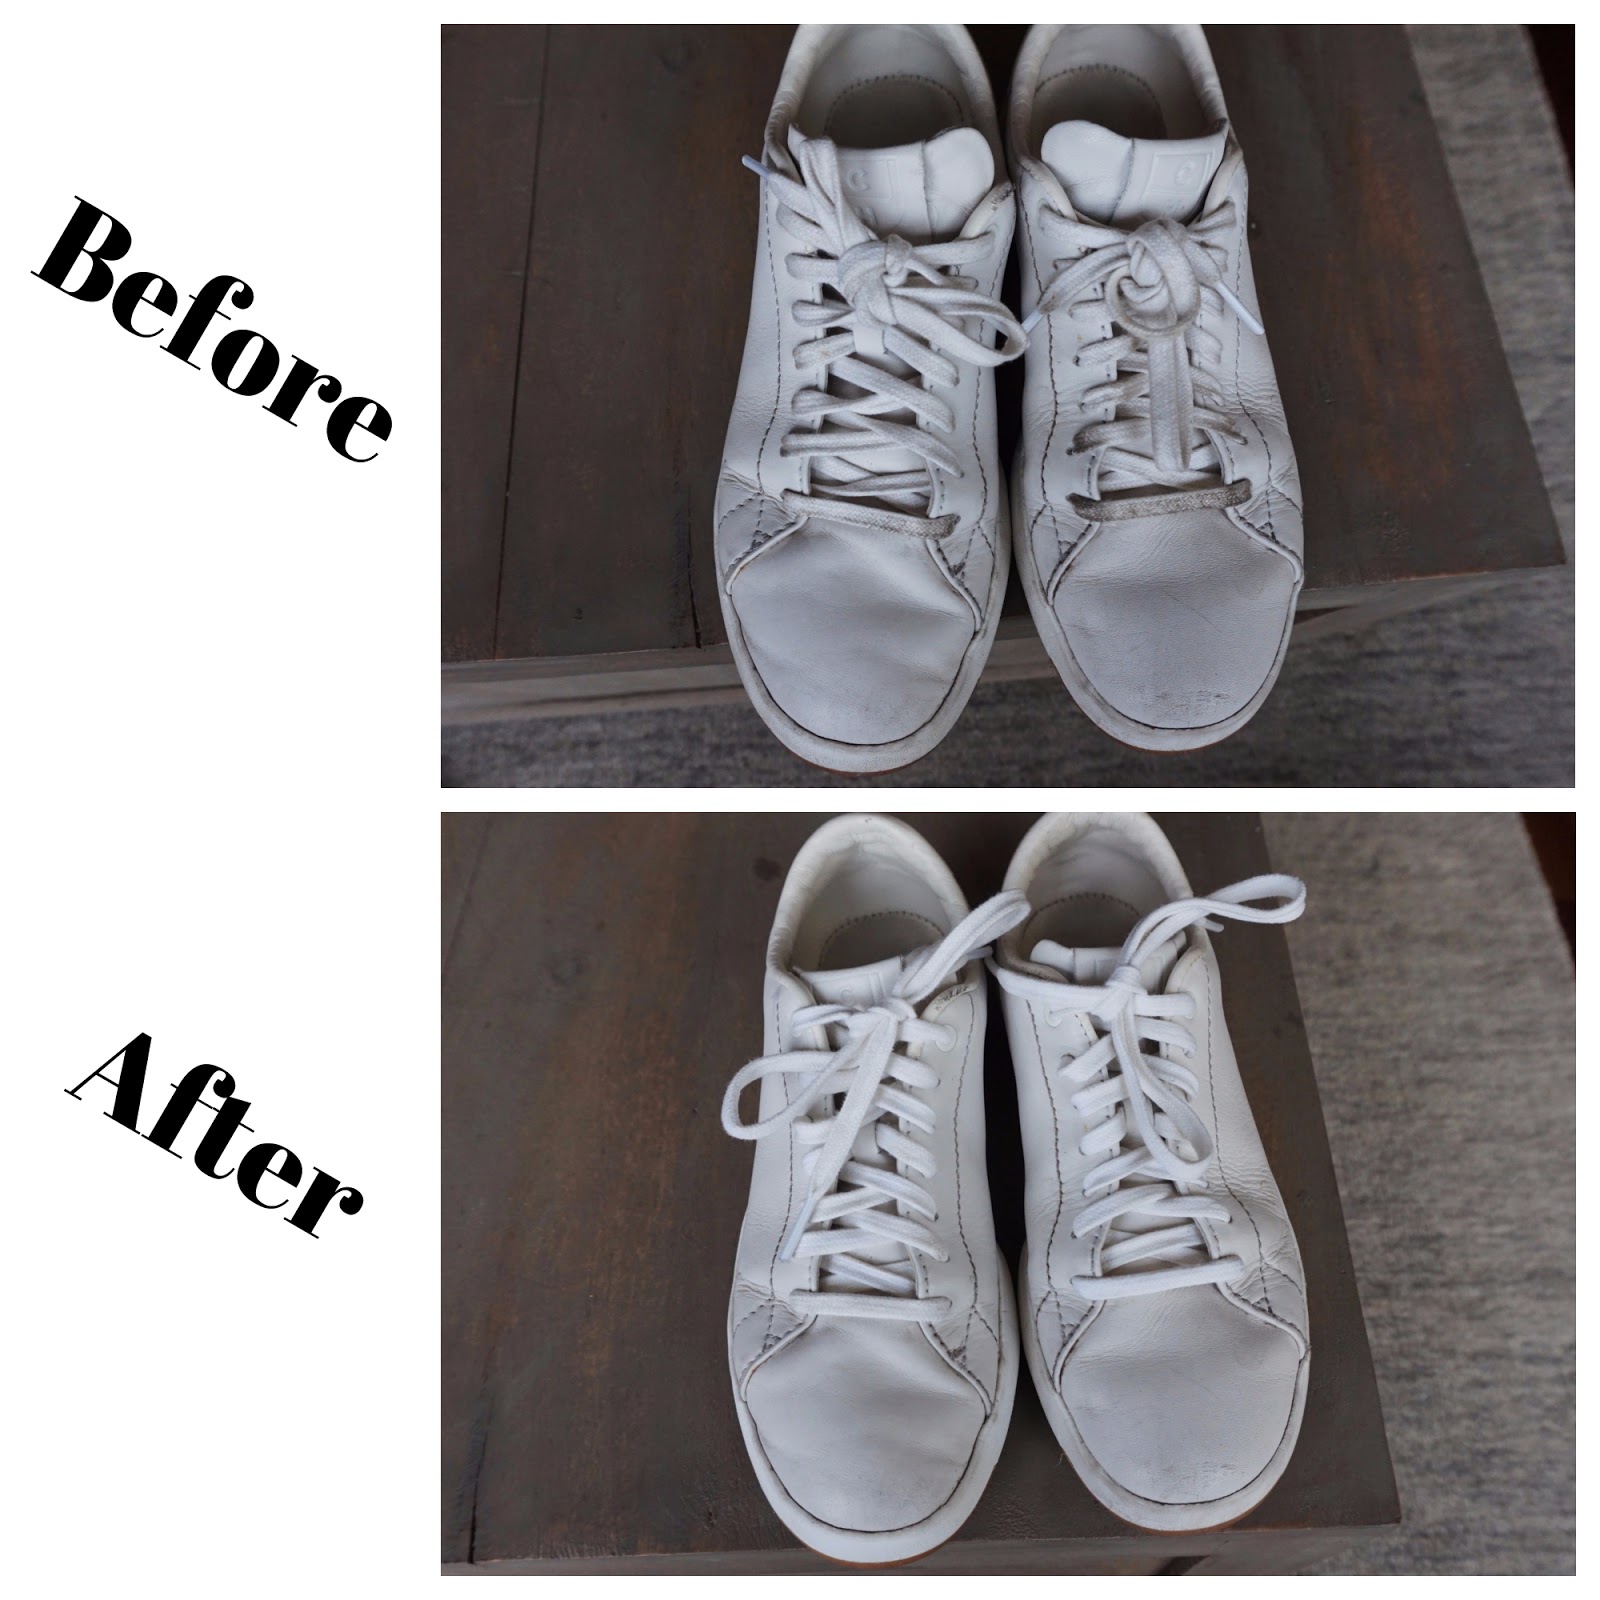 How to Clean Cole Haan White Shoes?